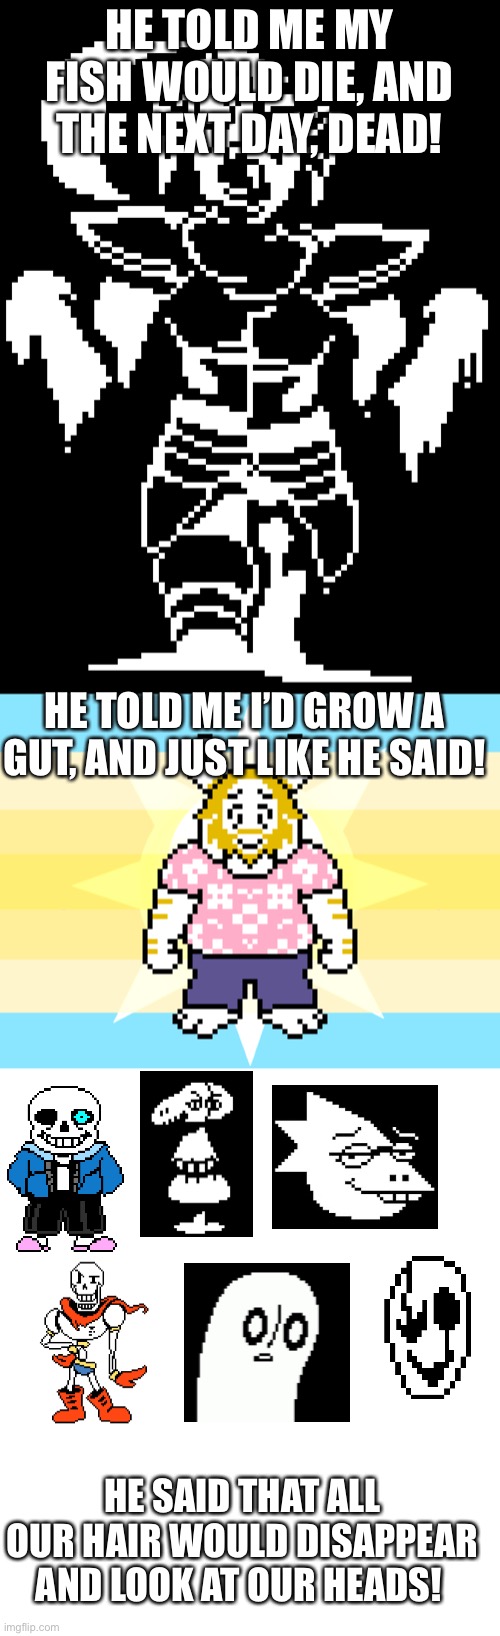 We don’t talk about Flowey! | HE TOLD ME MY FISH WOULD DIE, AND THE NEXT DAY, DEAD! HE TOLD ME I’D GROW A GUT, AND JUST LIKE HE SAID! HE SAID THAT ALL OUR HAIR WOULD DISAPPEAR AND LOOK AT OUR HEADS! | image tagged in blank white template | made w/ Imgflip meme maker